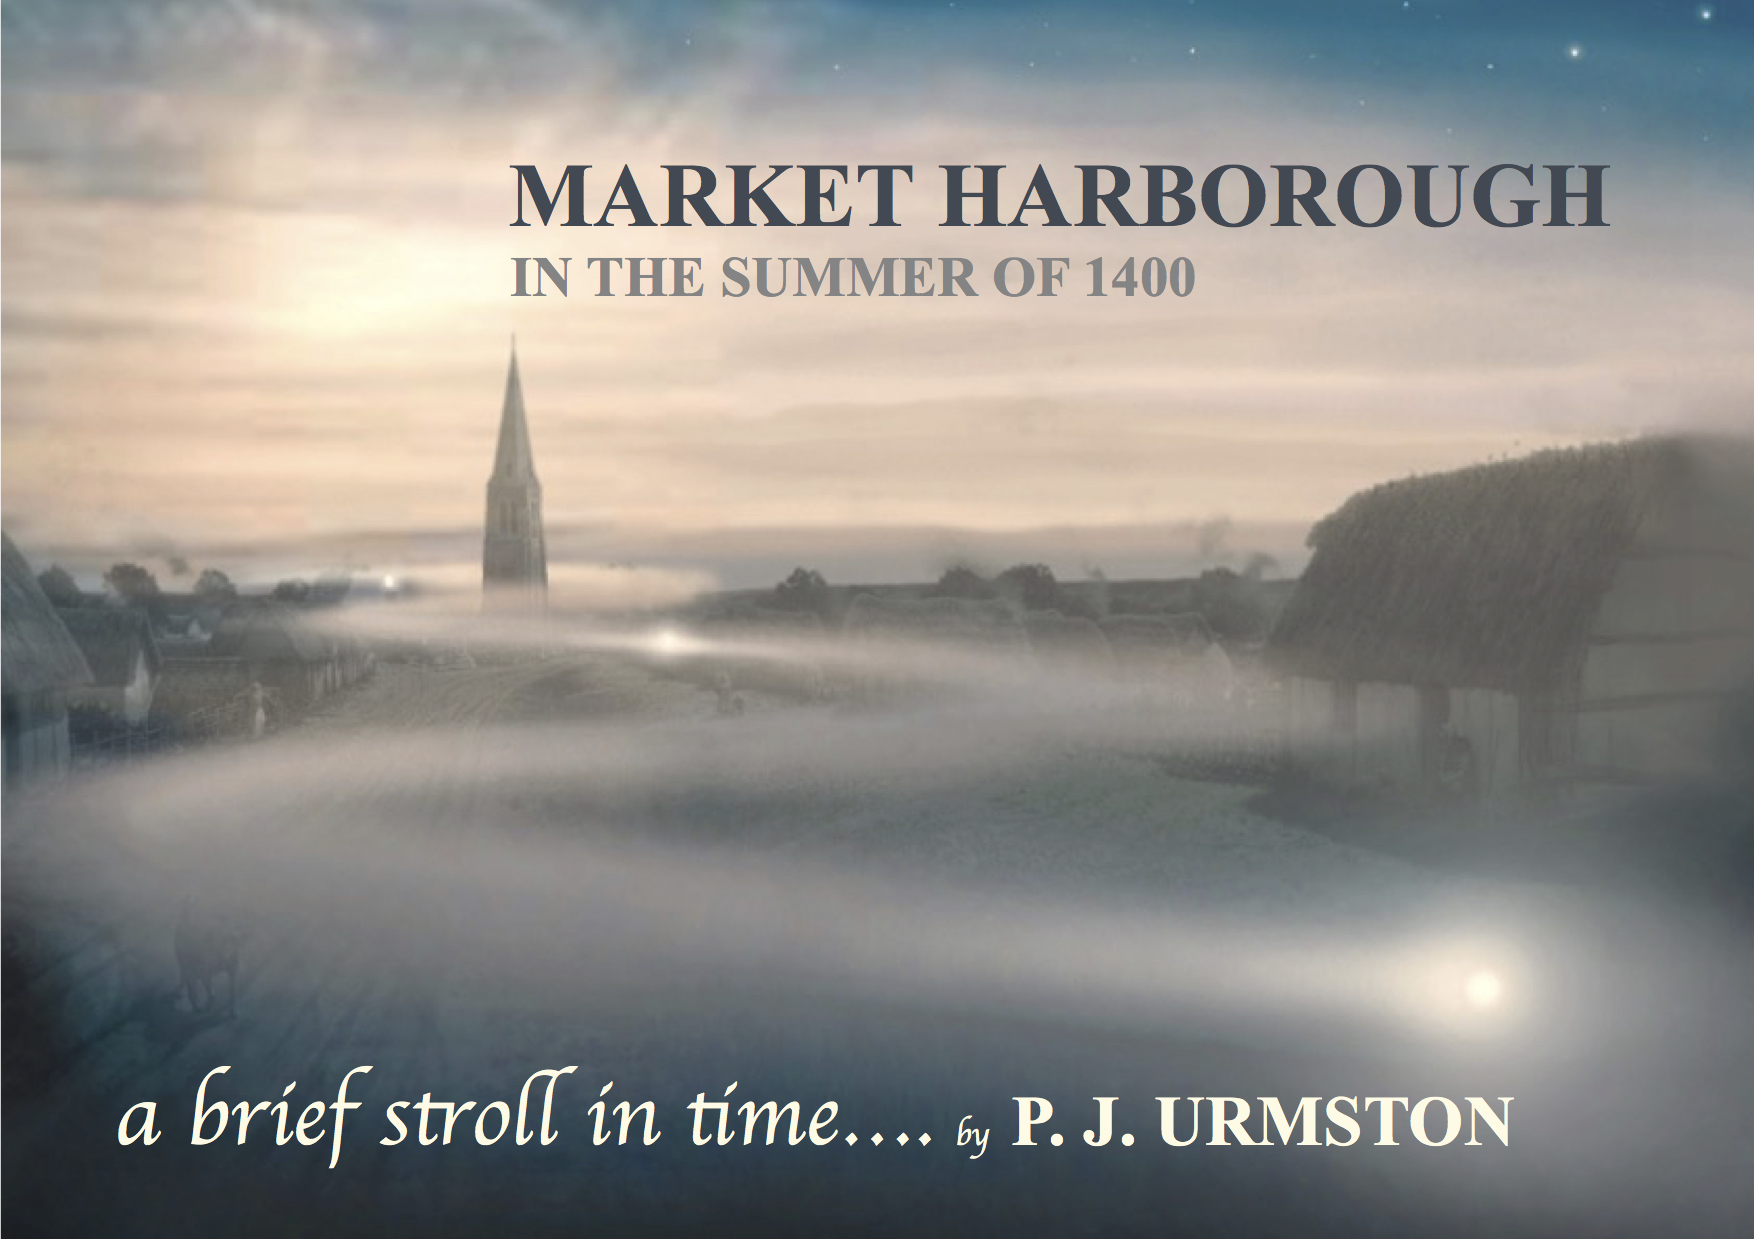 MARKET HARBOROUGH IN THE SUMMER OF 1400